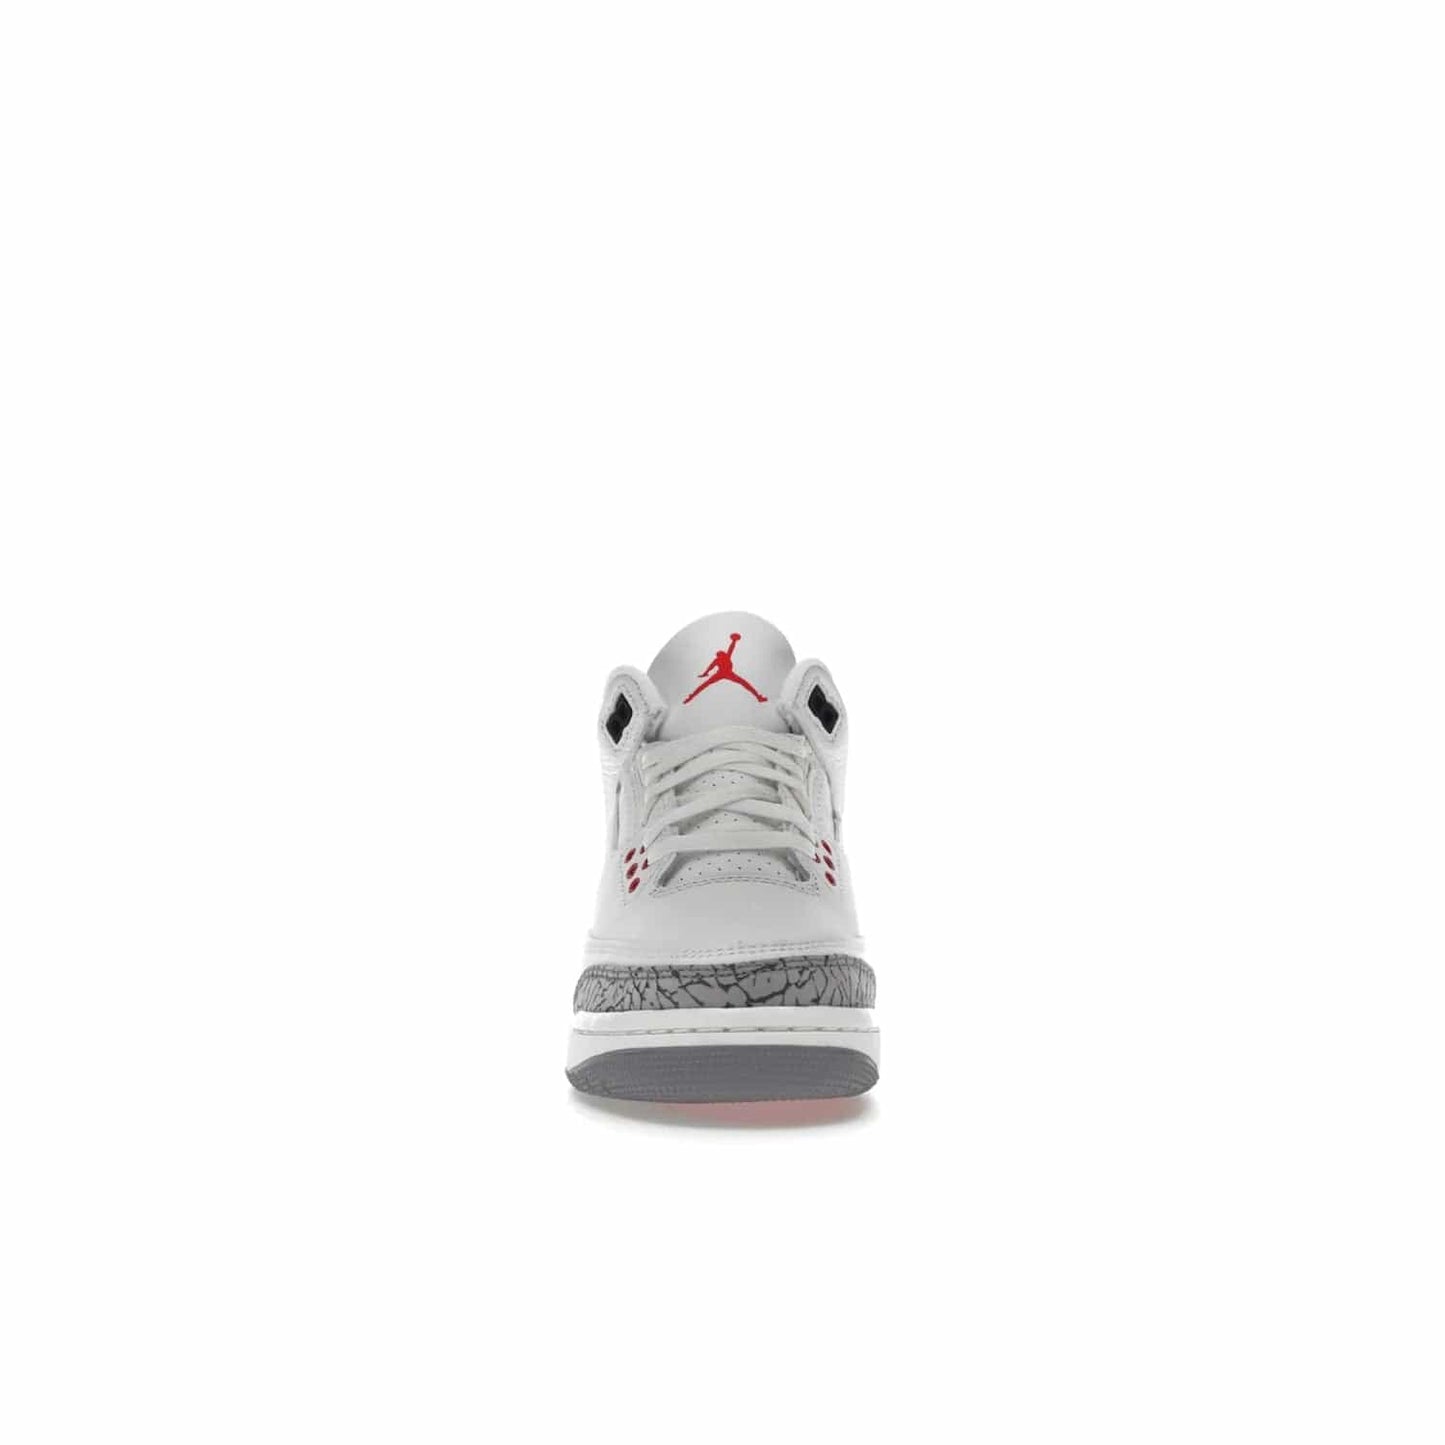 Jordan 3 Retro White Cement Reimagined (GS) - Image 10 - Only at www.BallersClubKickz.com - Grab the perfect blend of modern design and classic style with the Jordan 3 Retro White Cement Reimagined (GS). Features Summit White, Fire Red, Black, and Cement Grey colorway, iconic Jordan logo embroidered on the tongue, and “Nike Air” branding. Limited availability, get your pair before March 11th 2023.